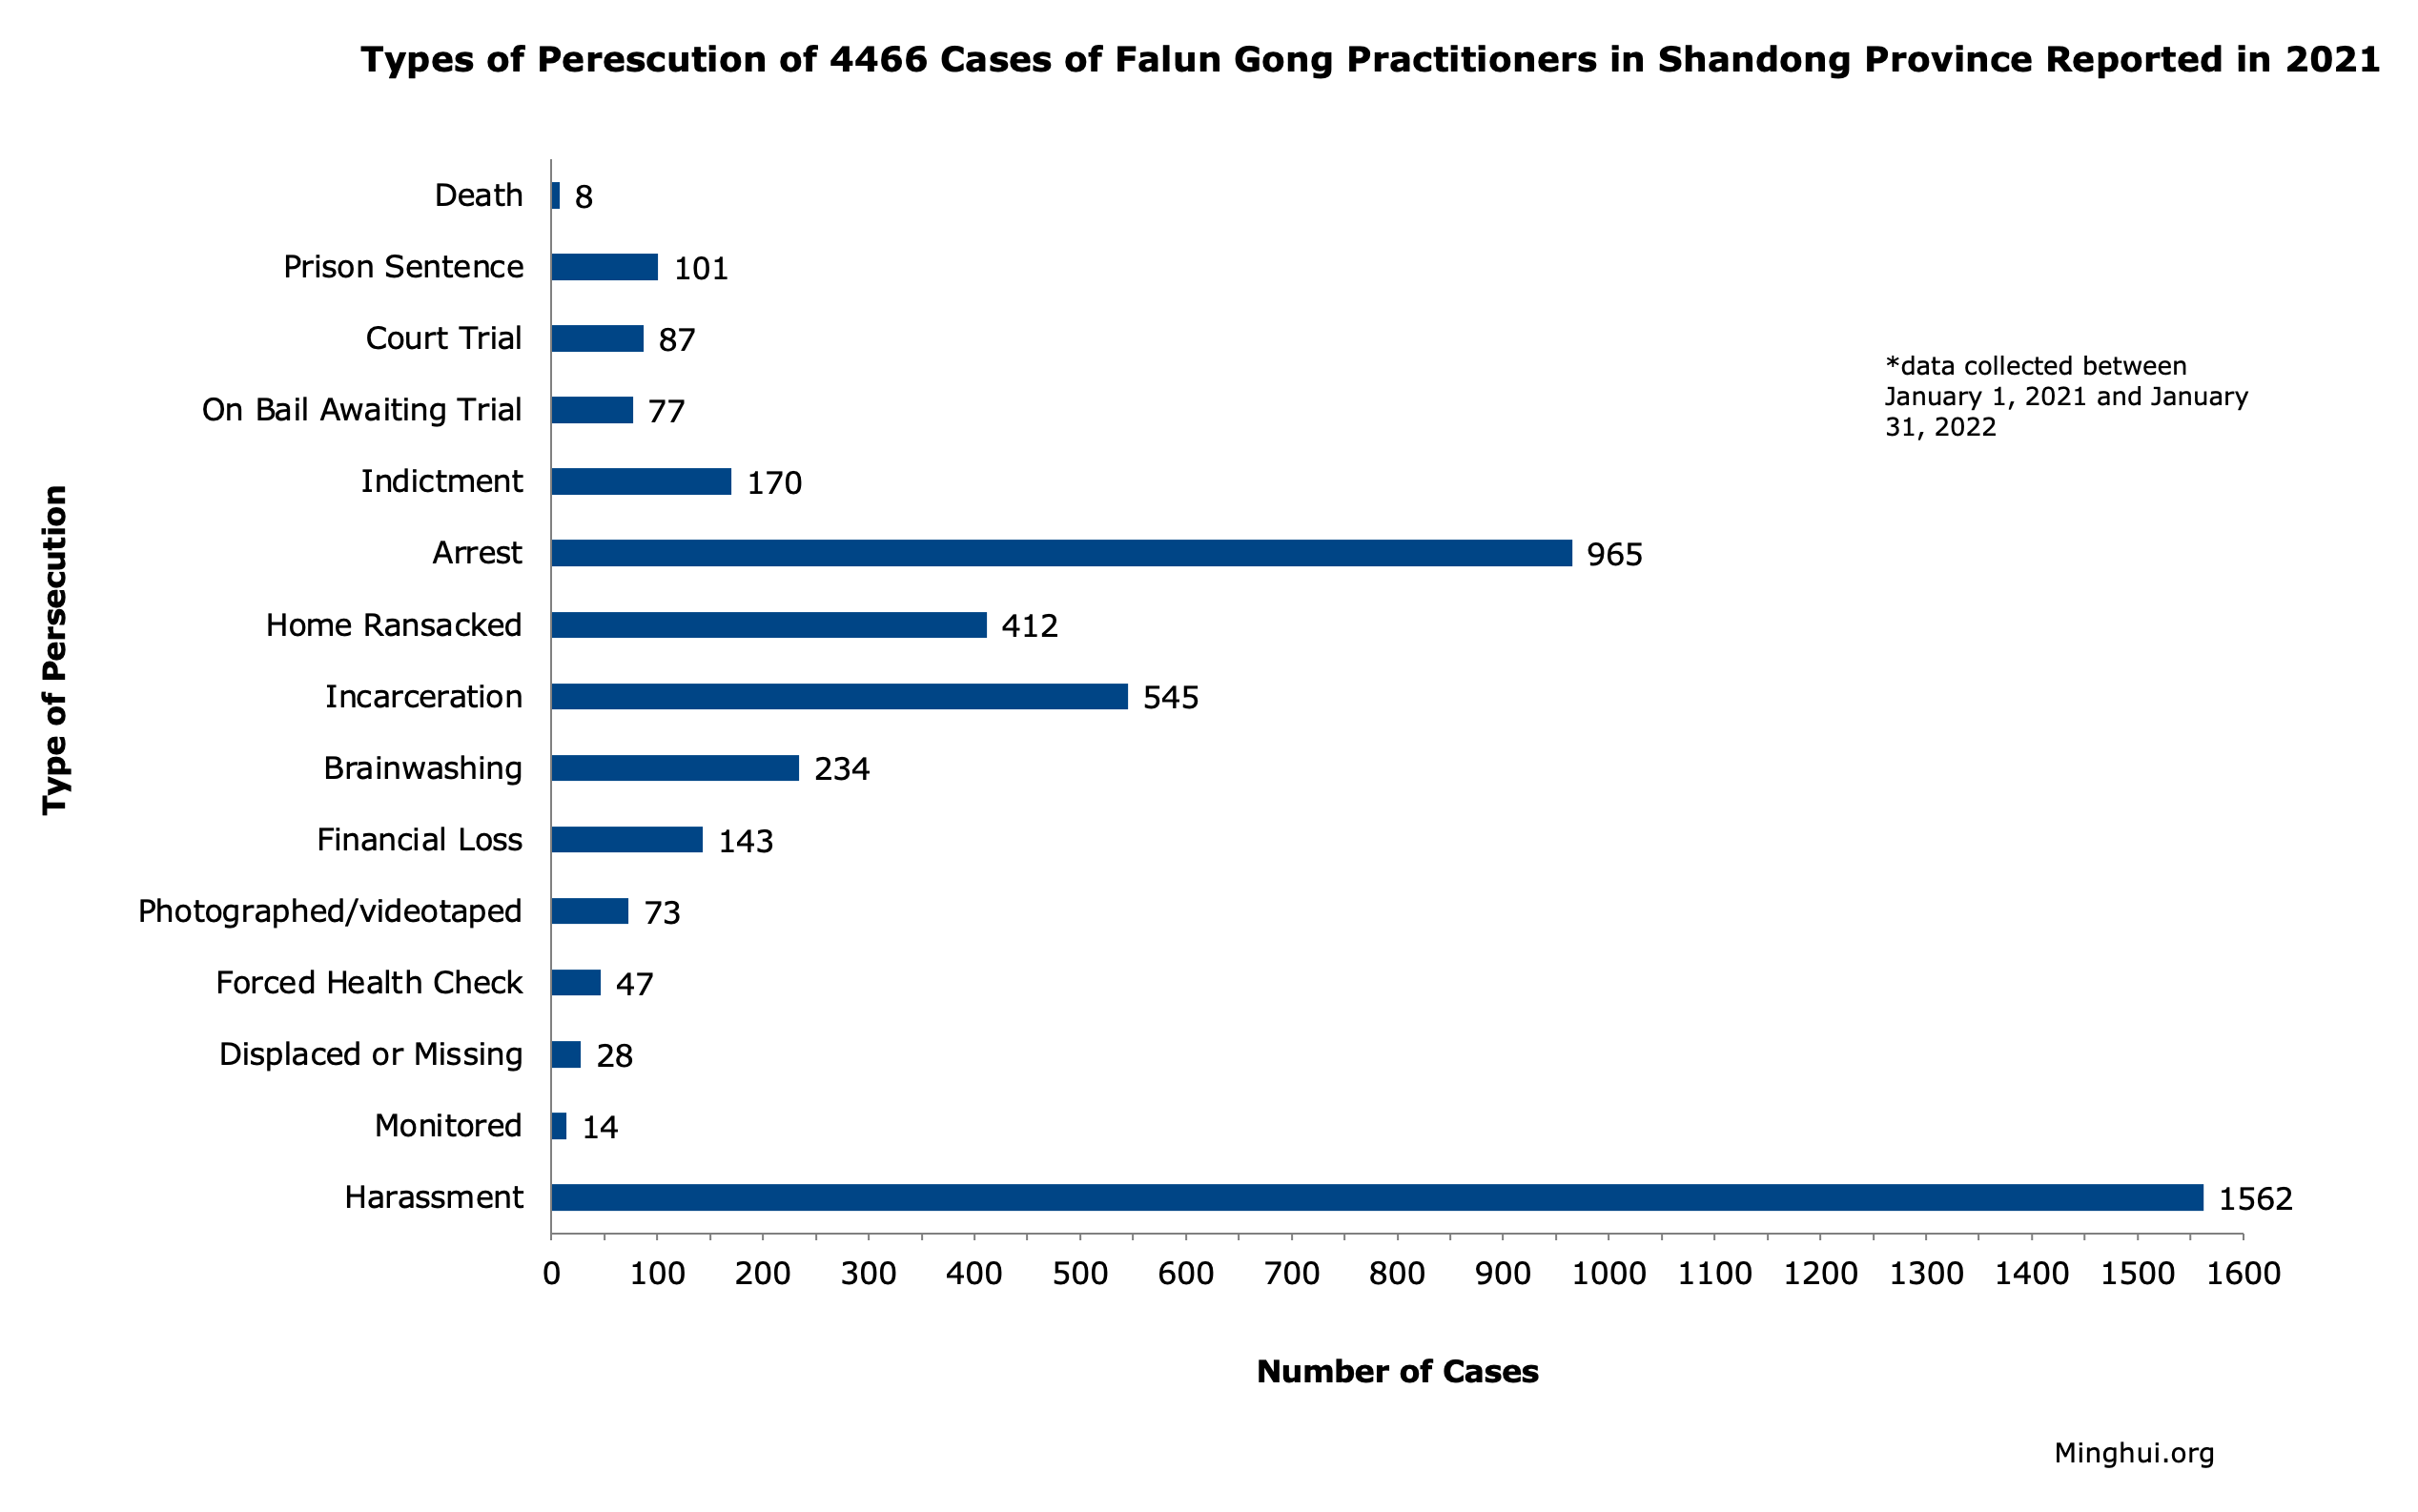 Image for article Shandong Province: Overview of Falun Gong Persecution Cases Reported in 2021